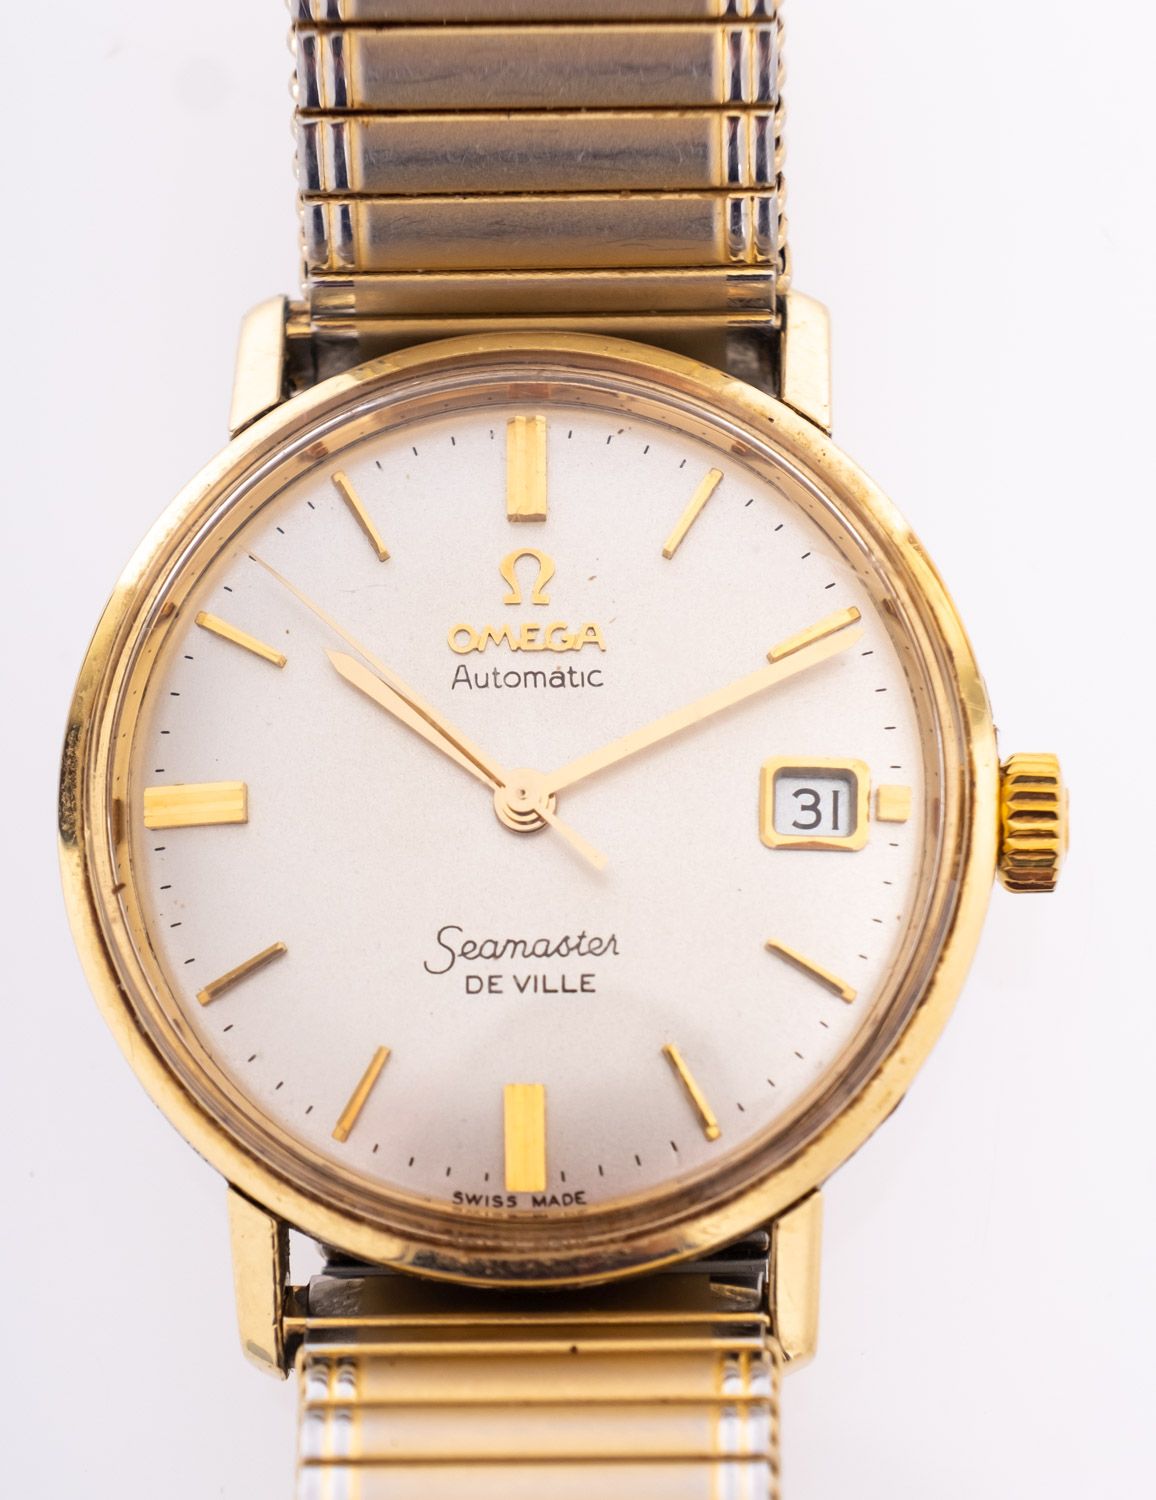 Omega Seamaster De Ville, the silvered dial with raised baton numerals,